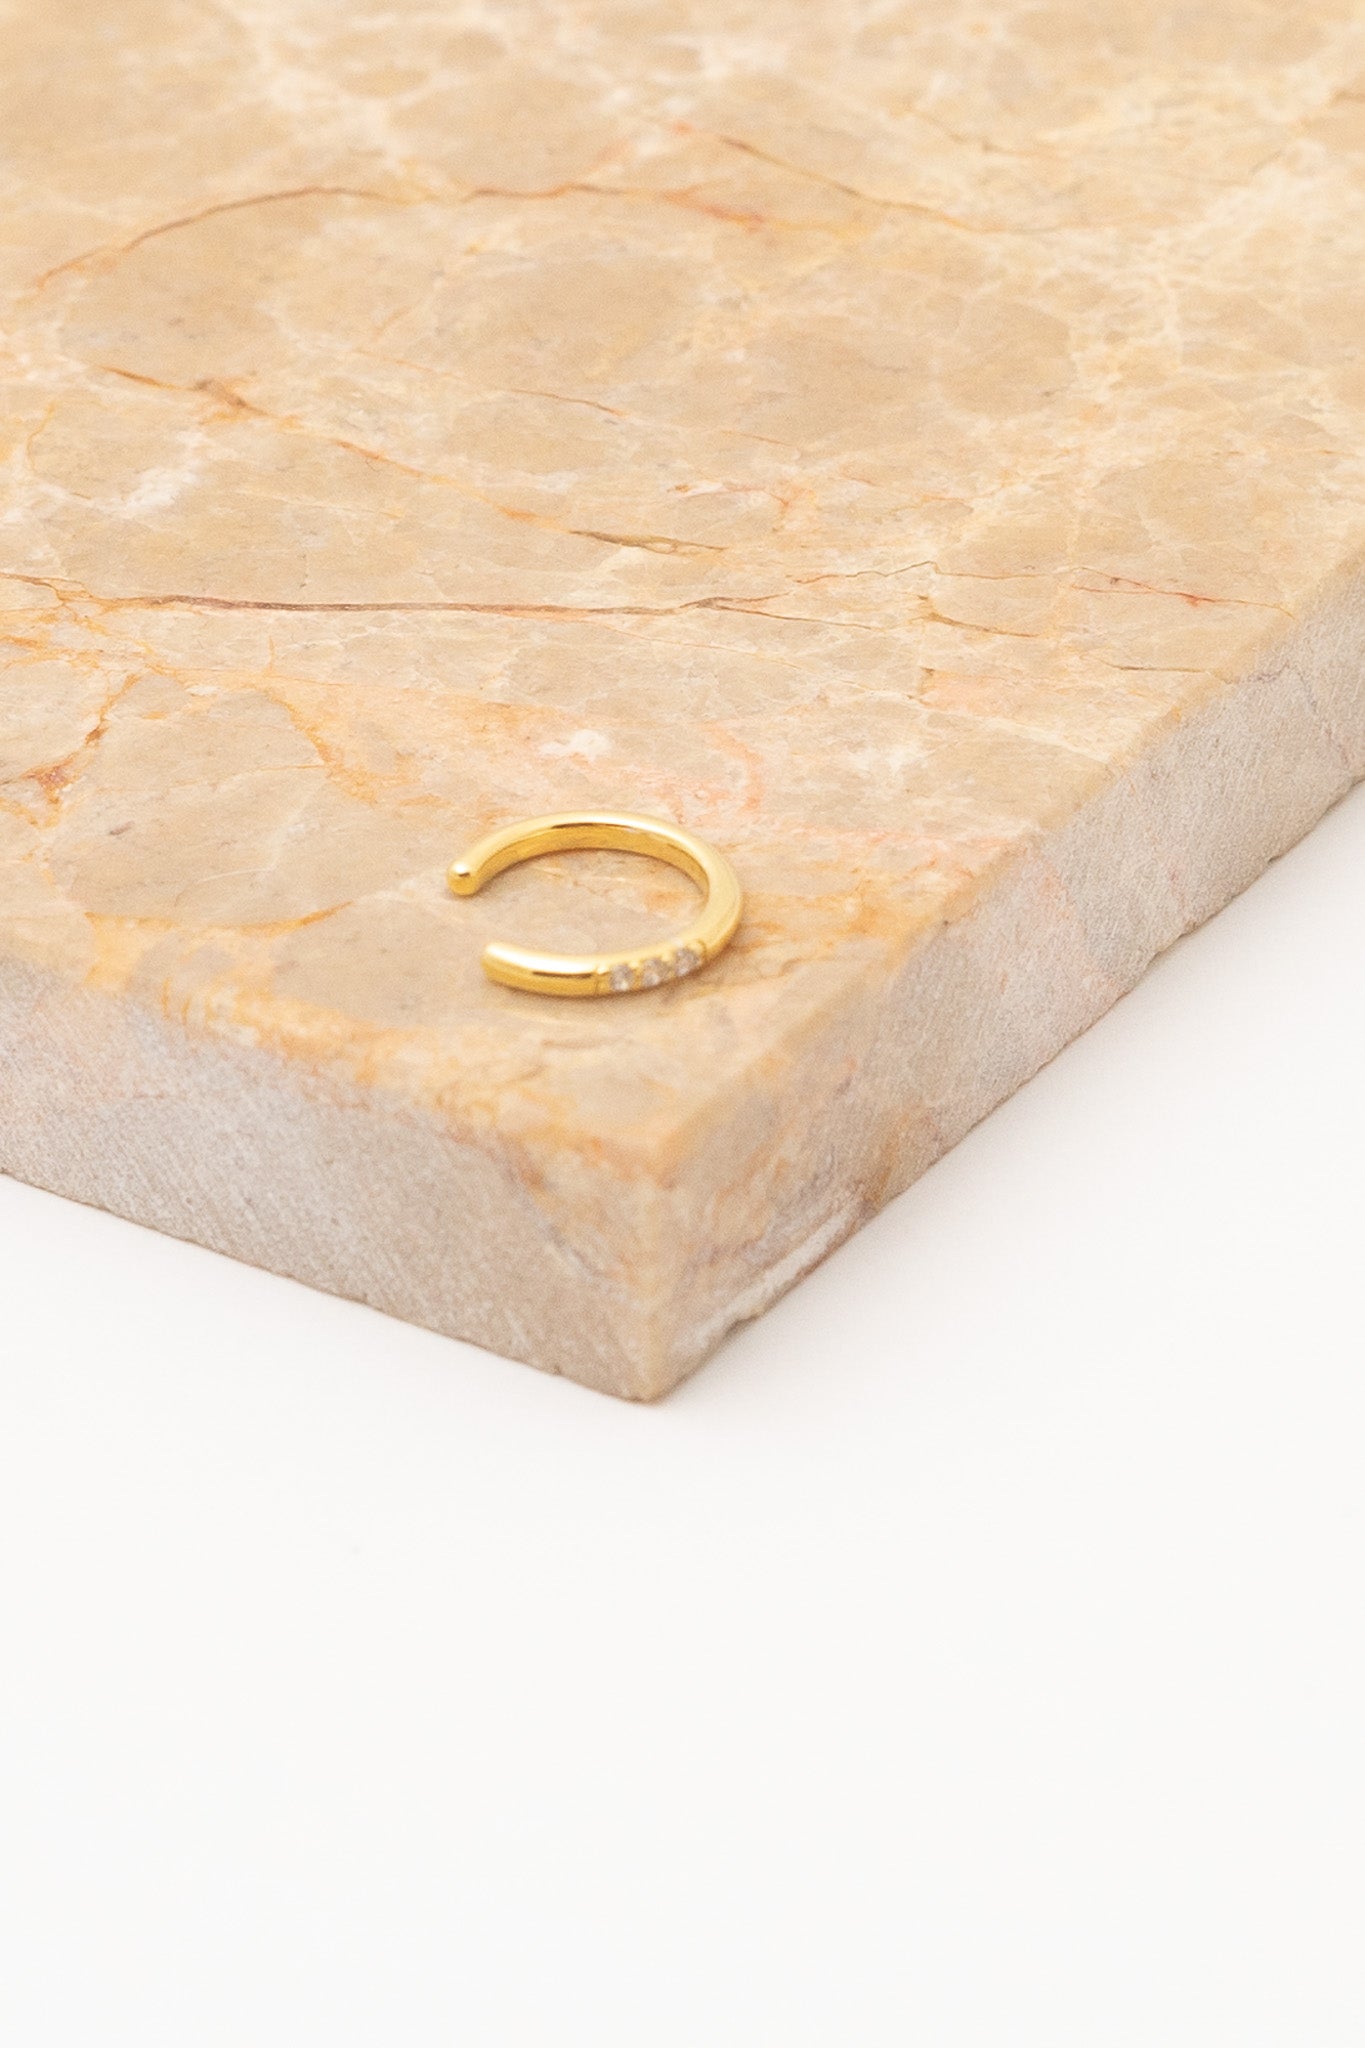 gold thin ear cuff on tan marble background